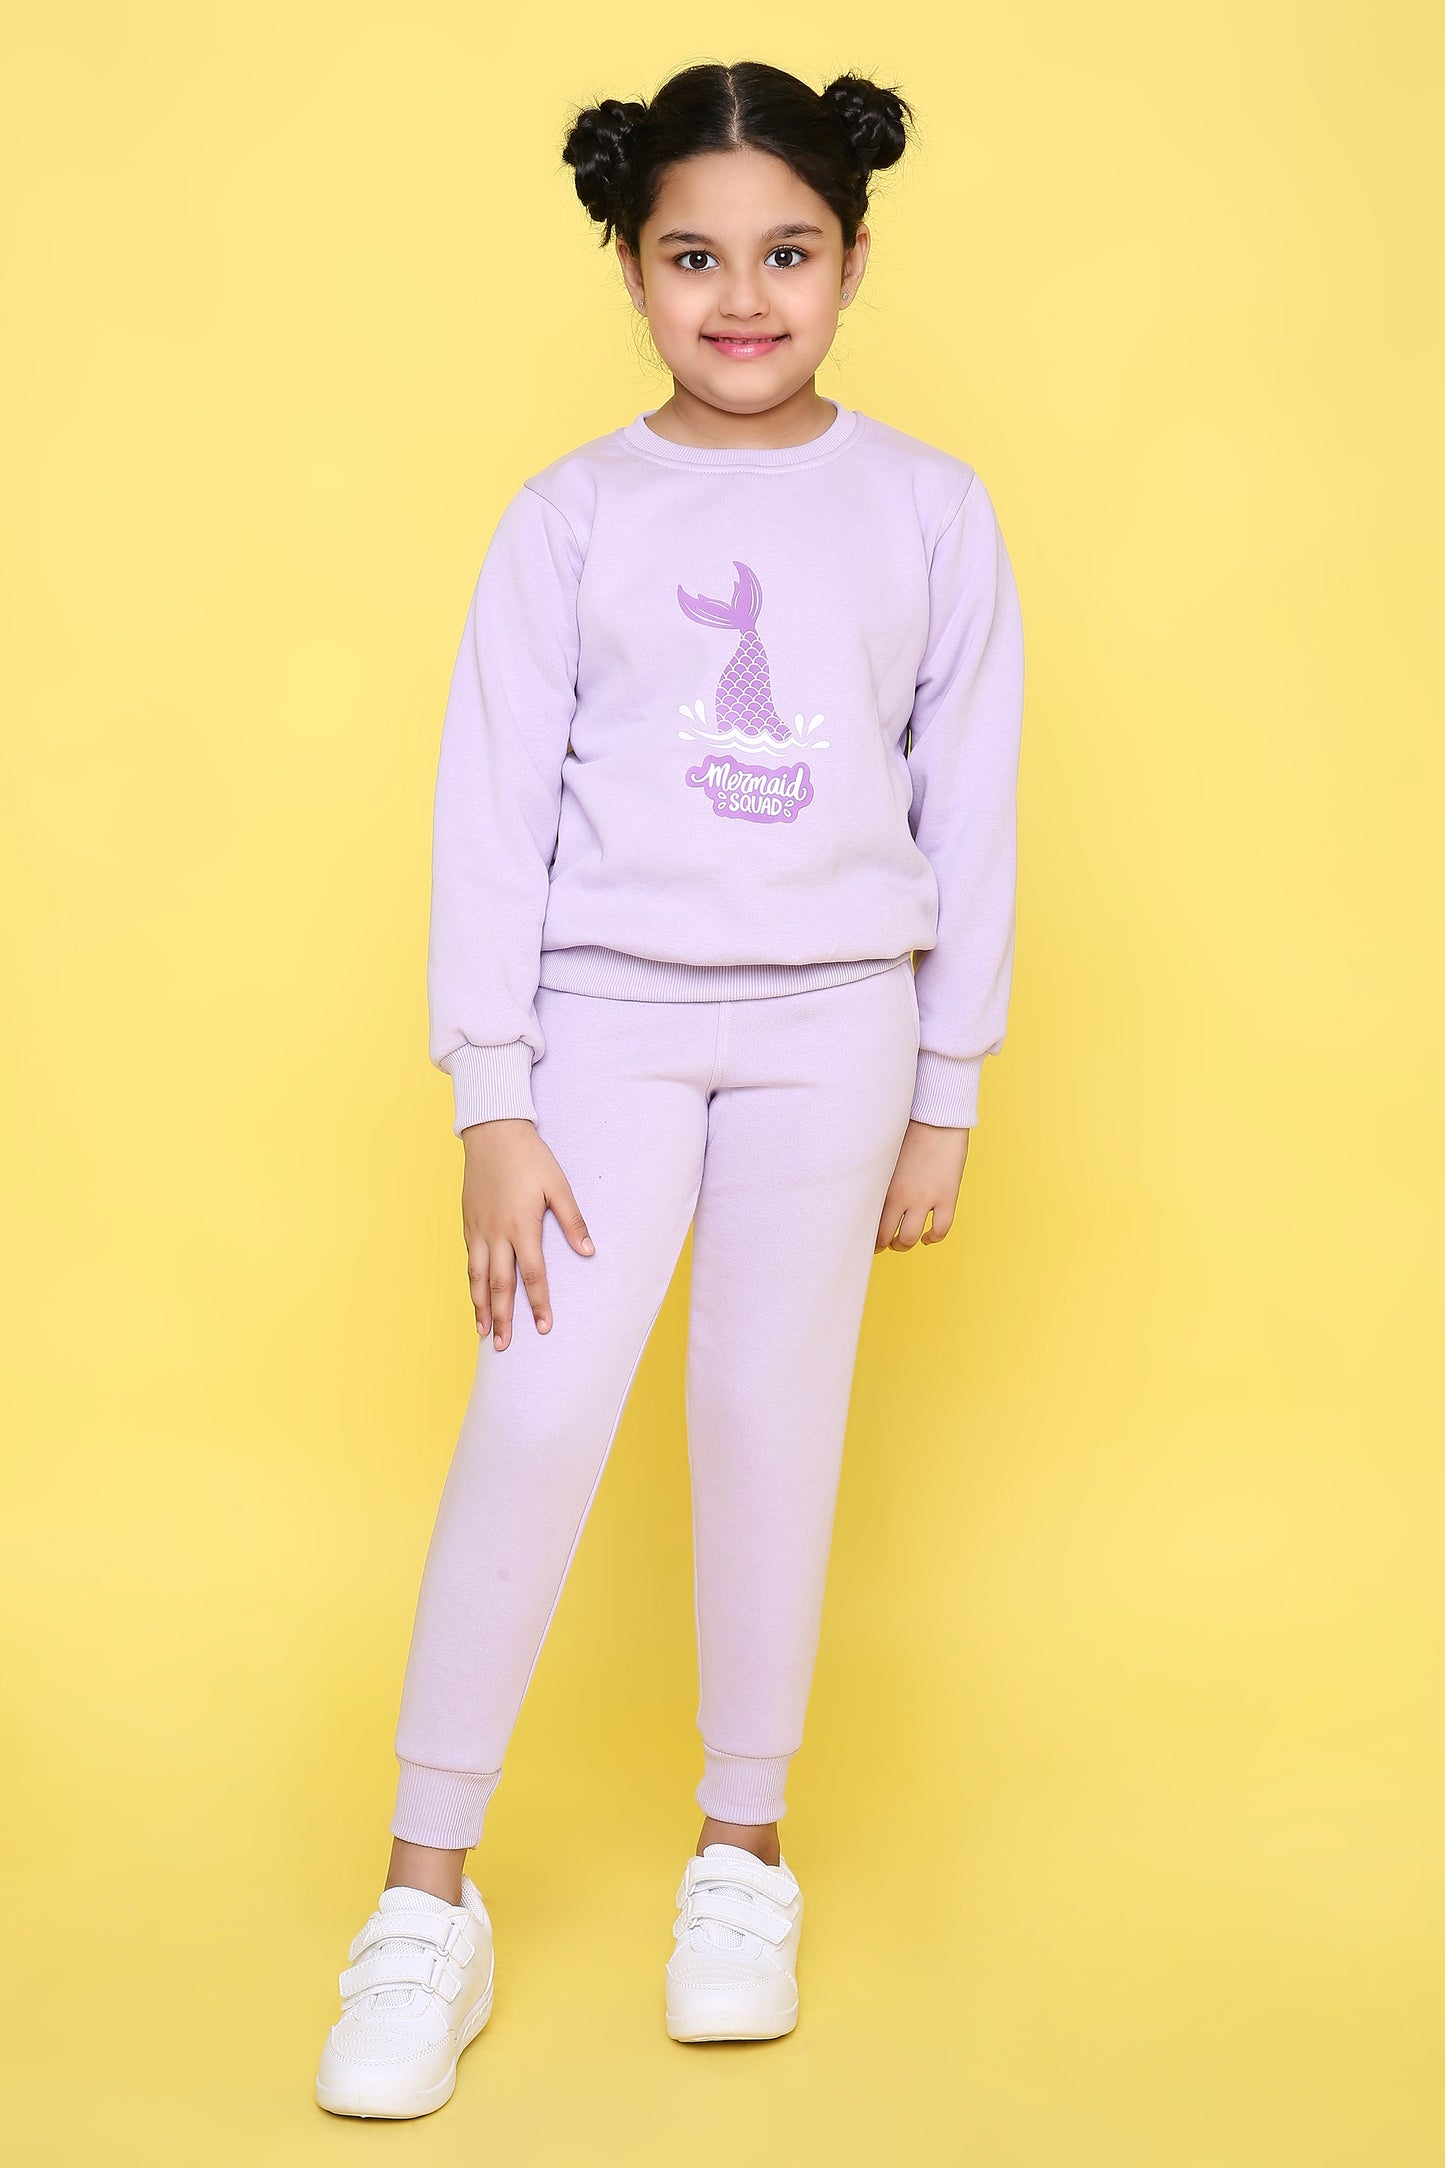 Knitting Doodles Kids' Jogger Set with Warm Fleece and Pretty Mermaid Squad Print- Purple